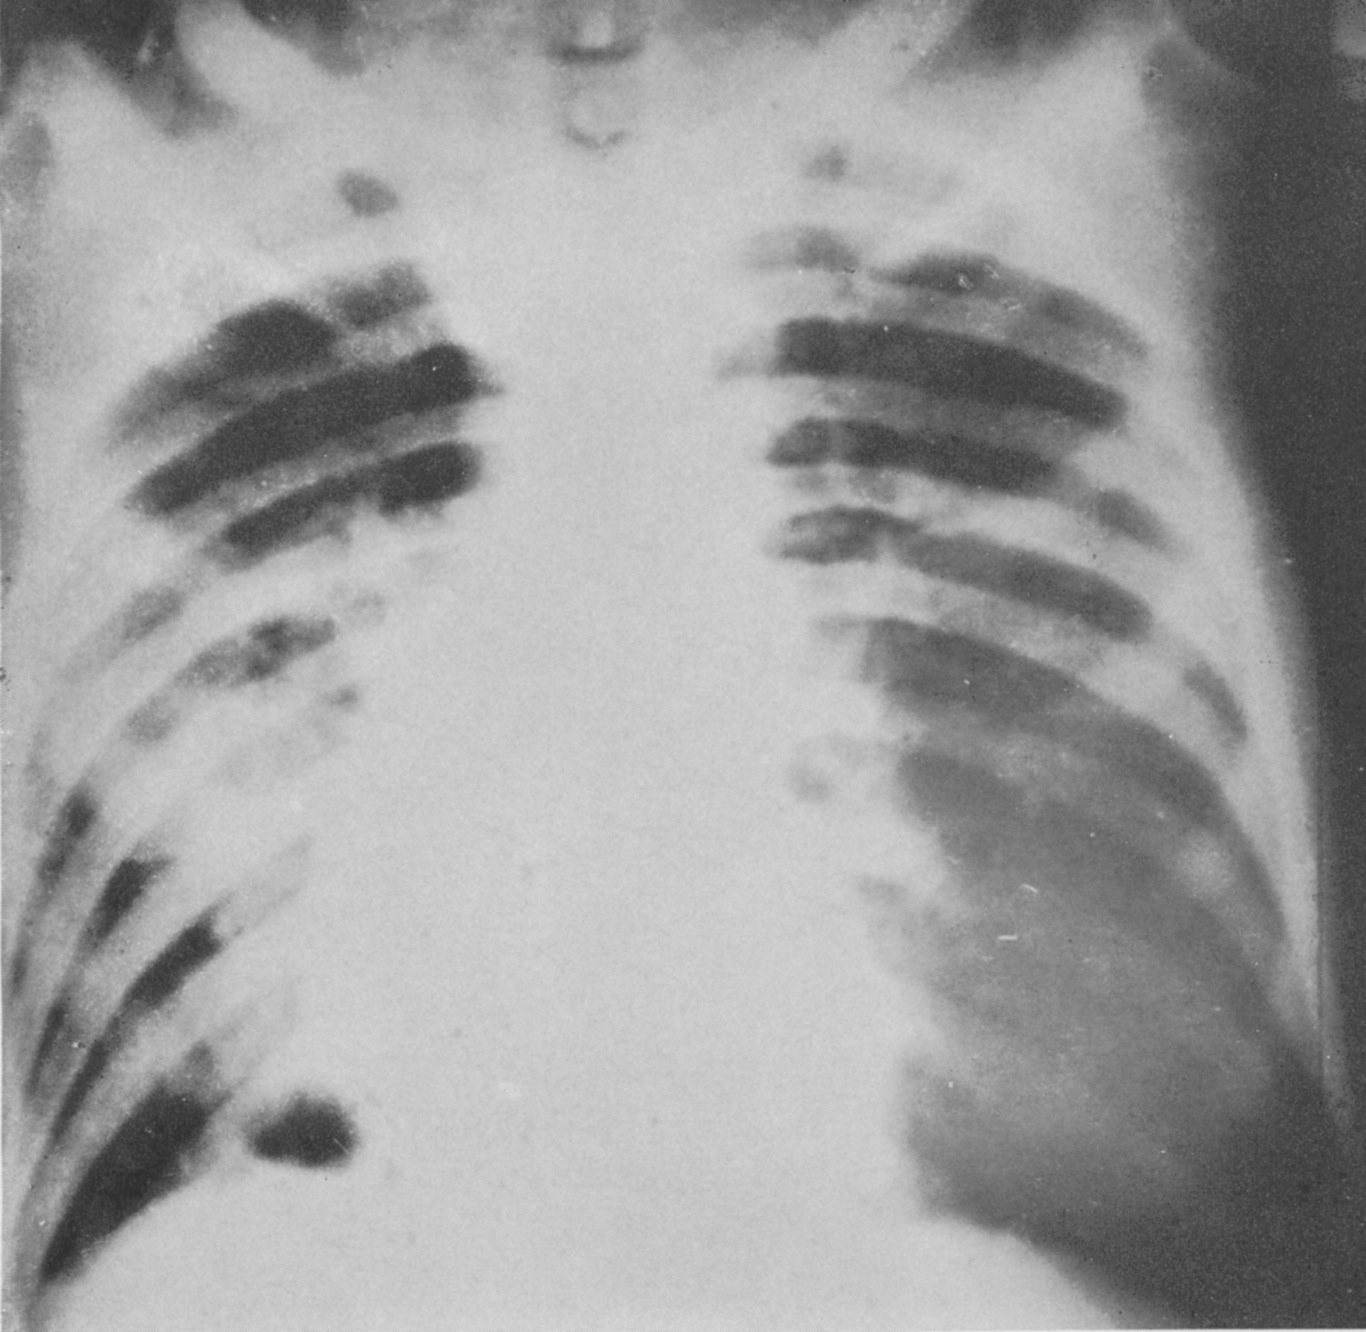 2Type 1, Influenza bronchopneumonia_Viewed as from behind